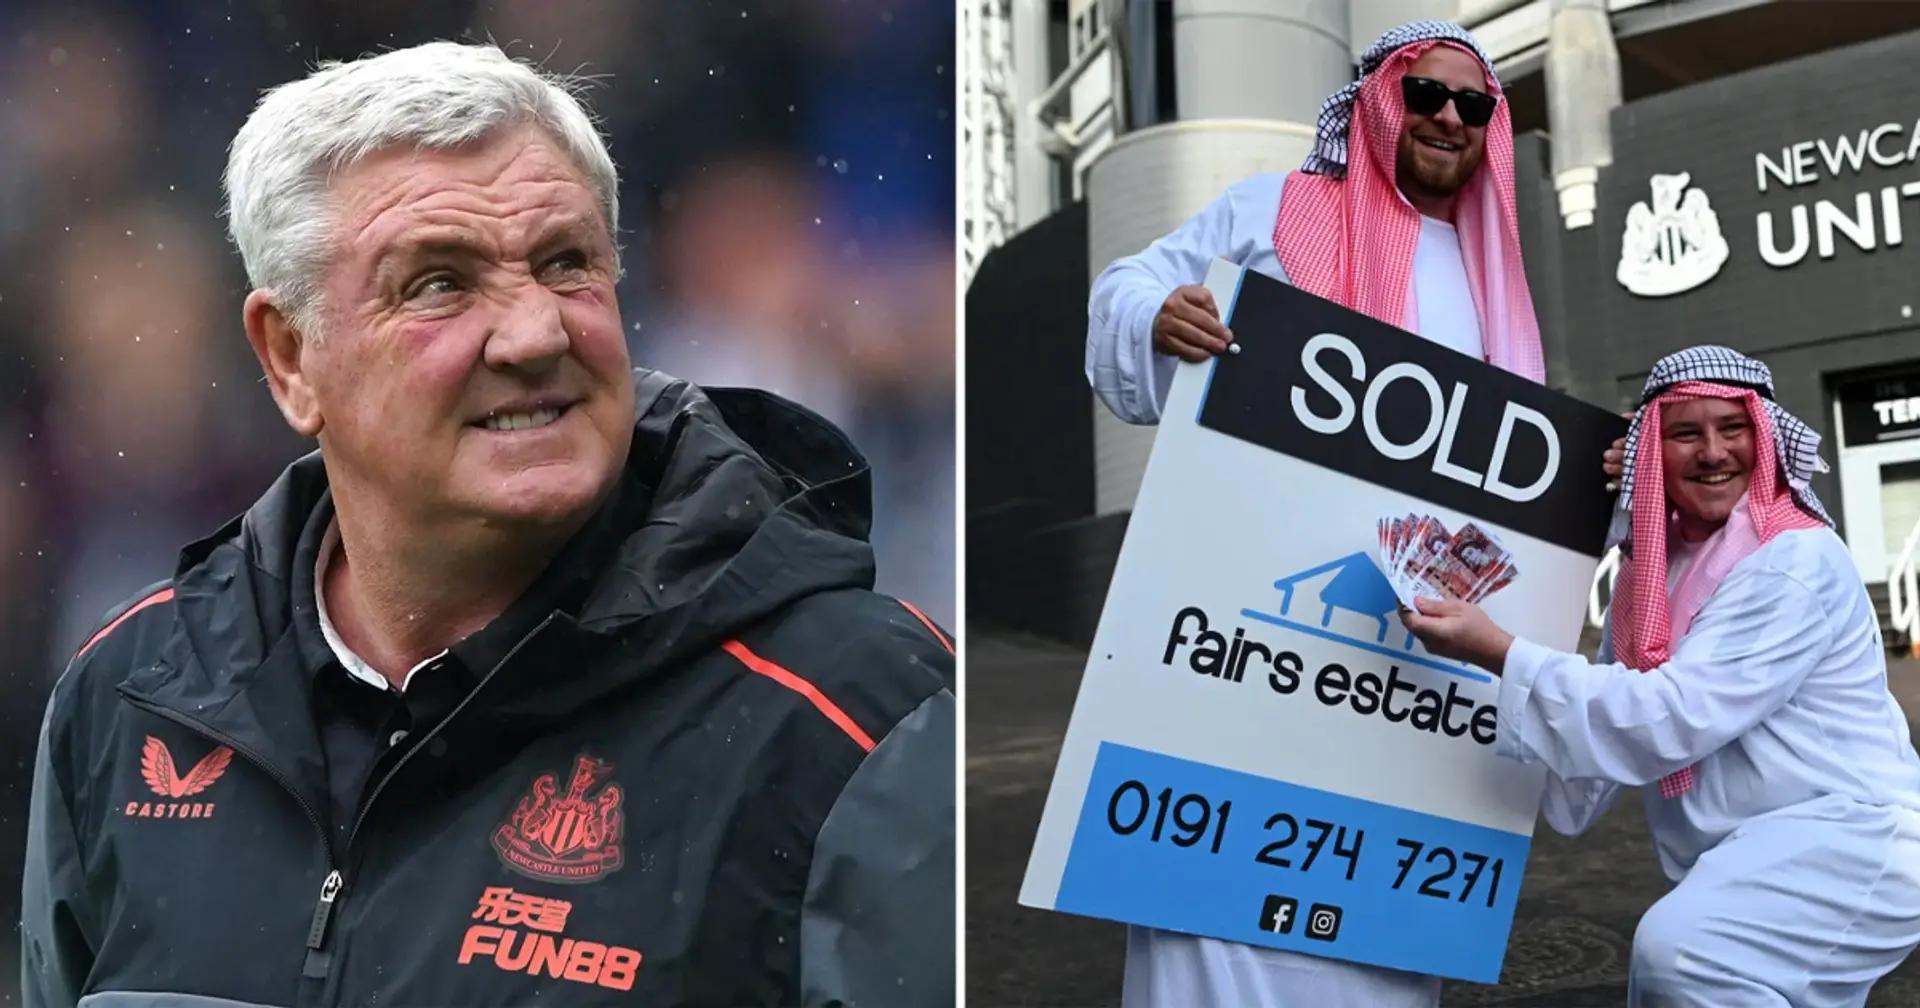 Newcastle aim to spend £140m less than allowed by FFP rules in January